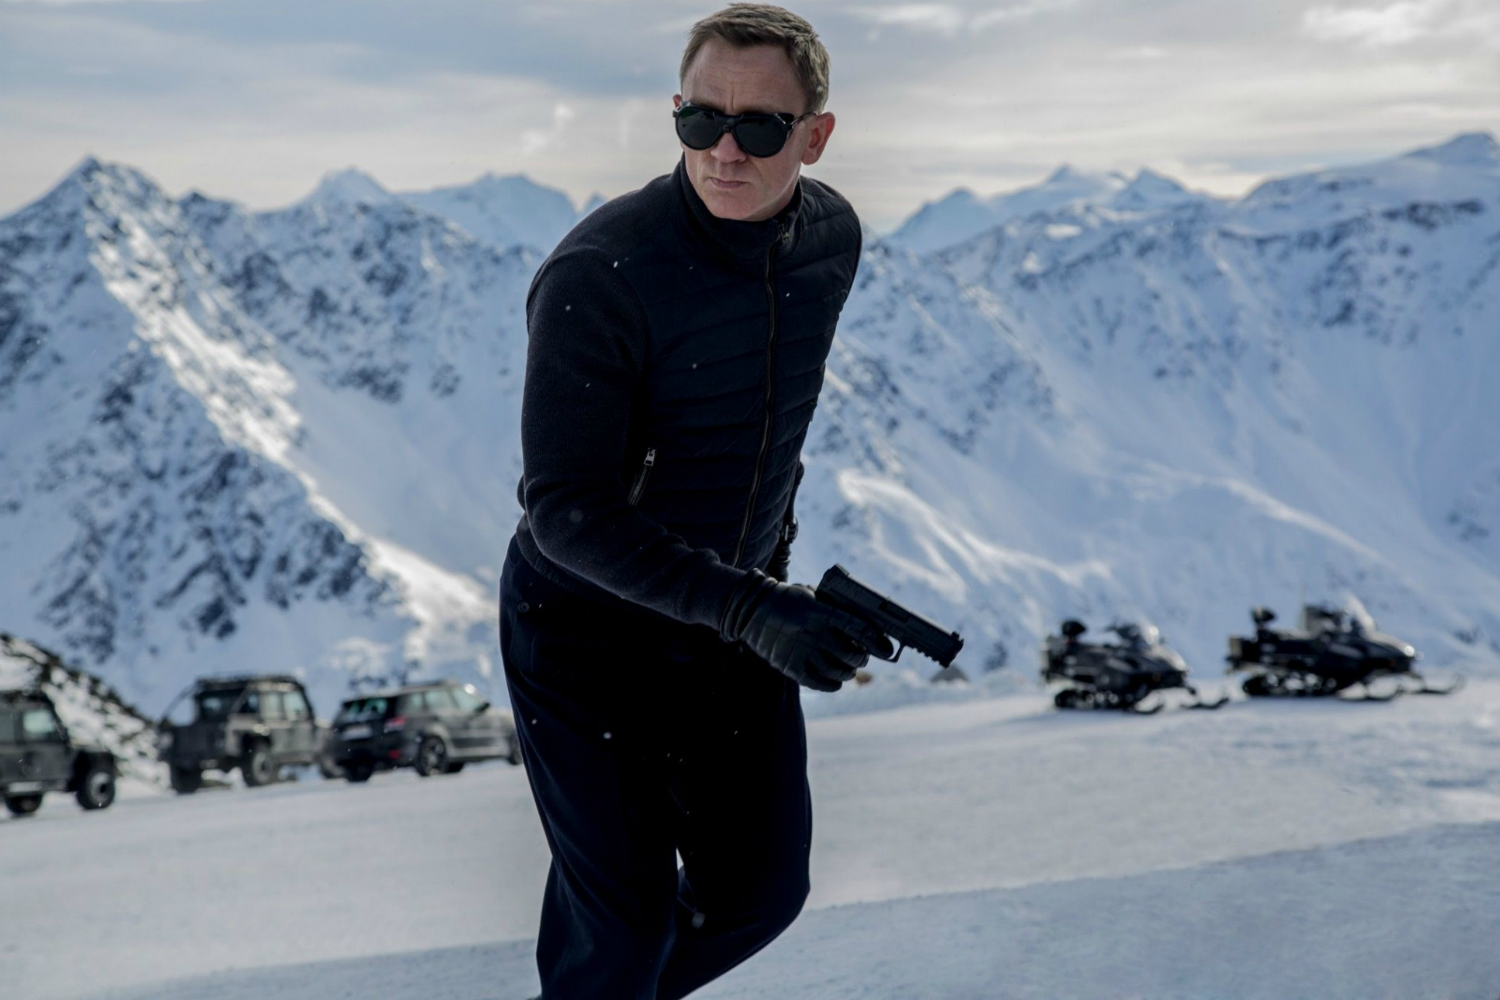 hulu launches 4k streaming spectre snow scene